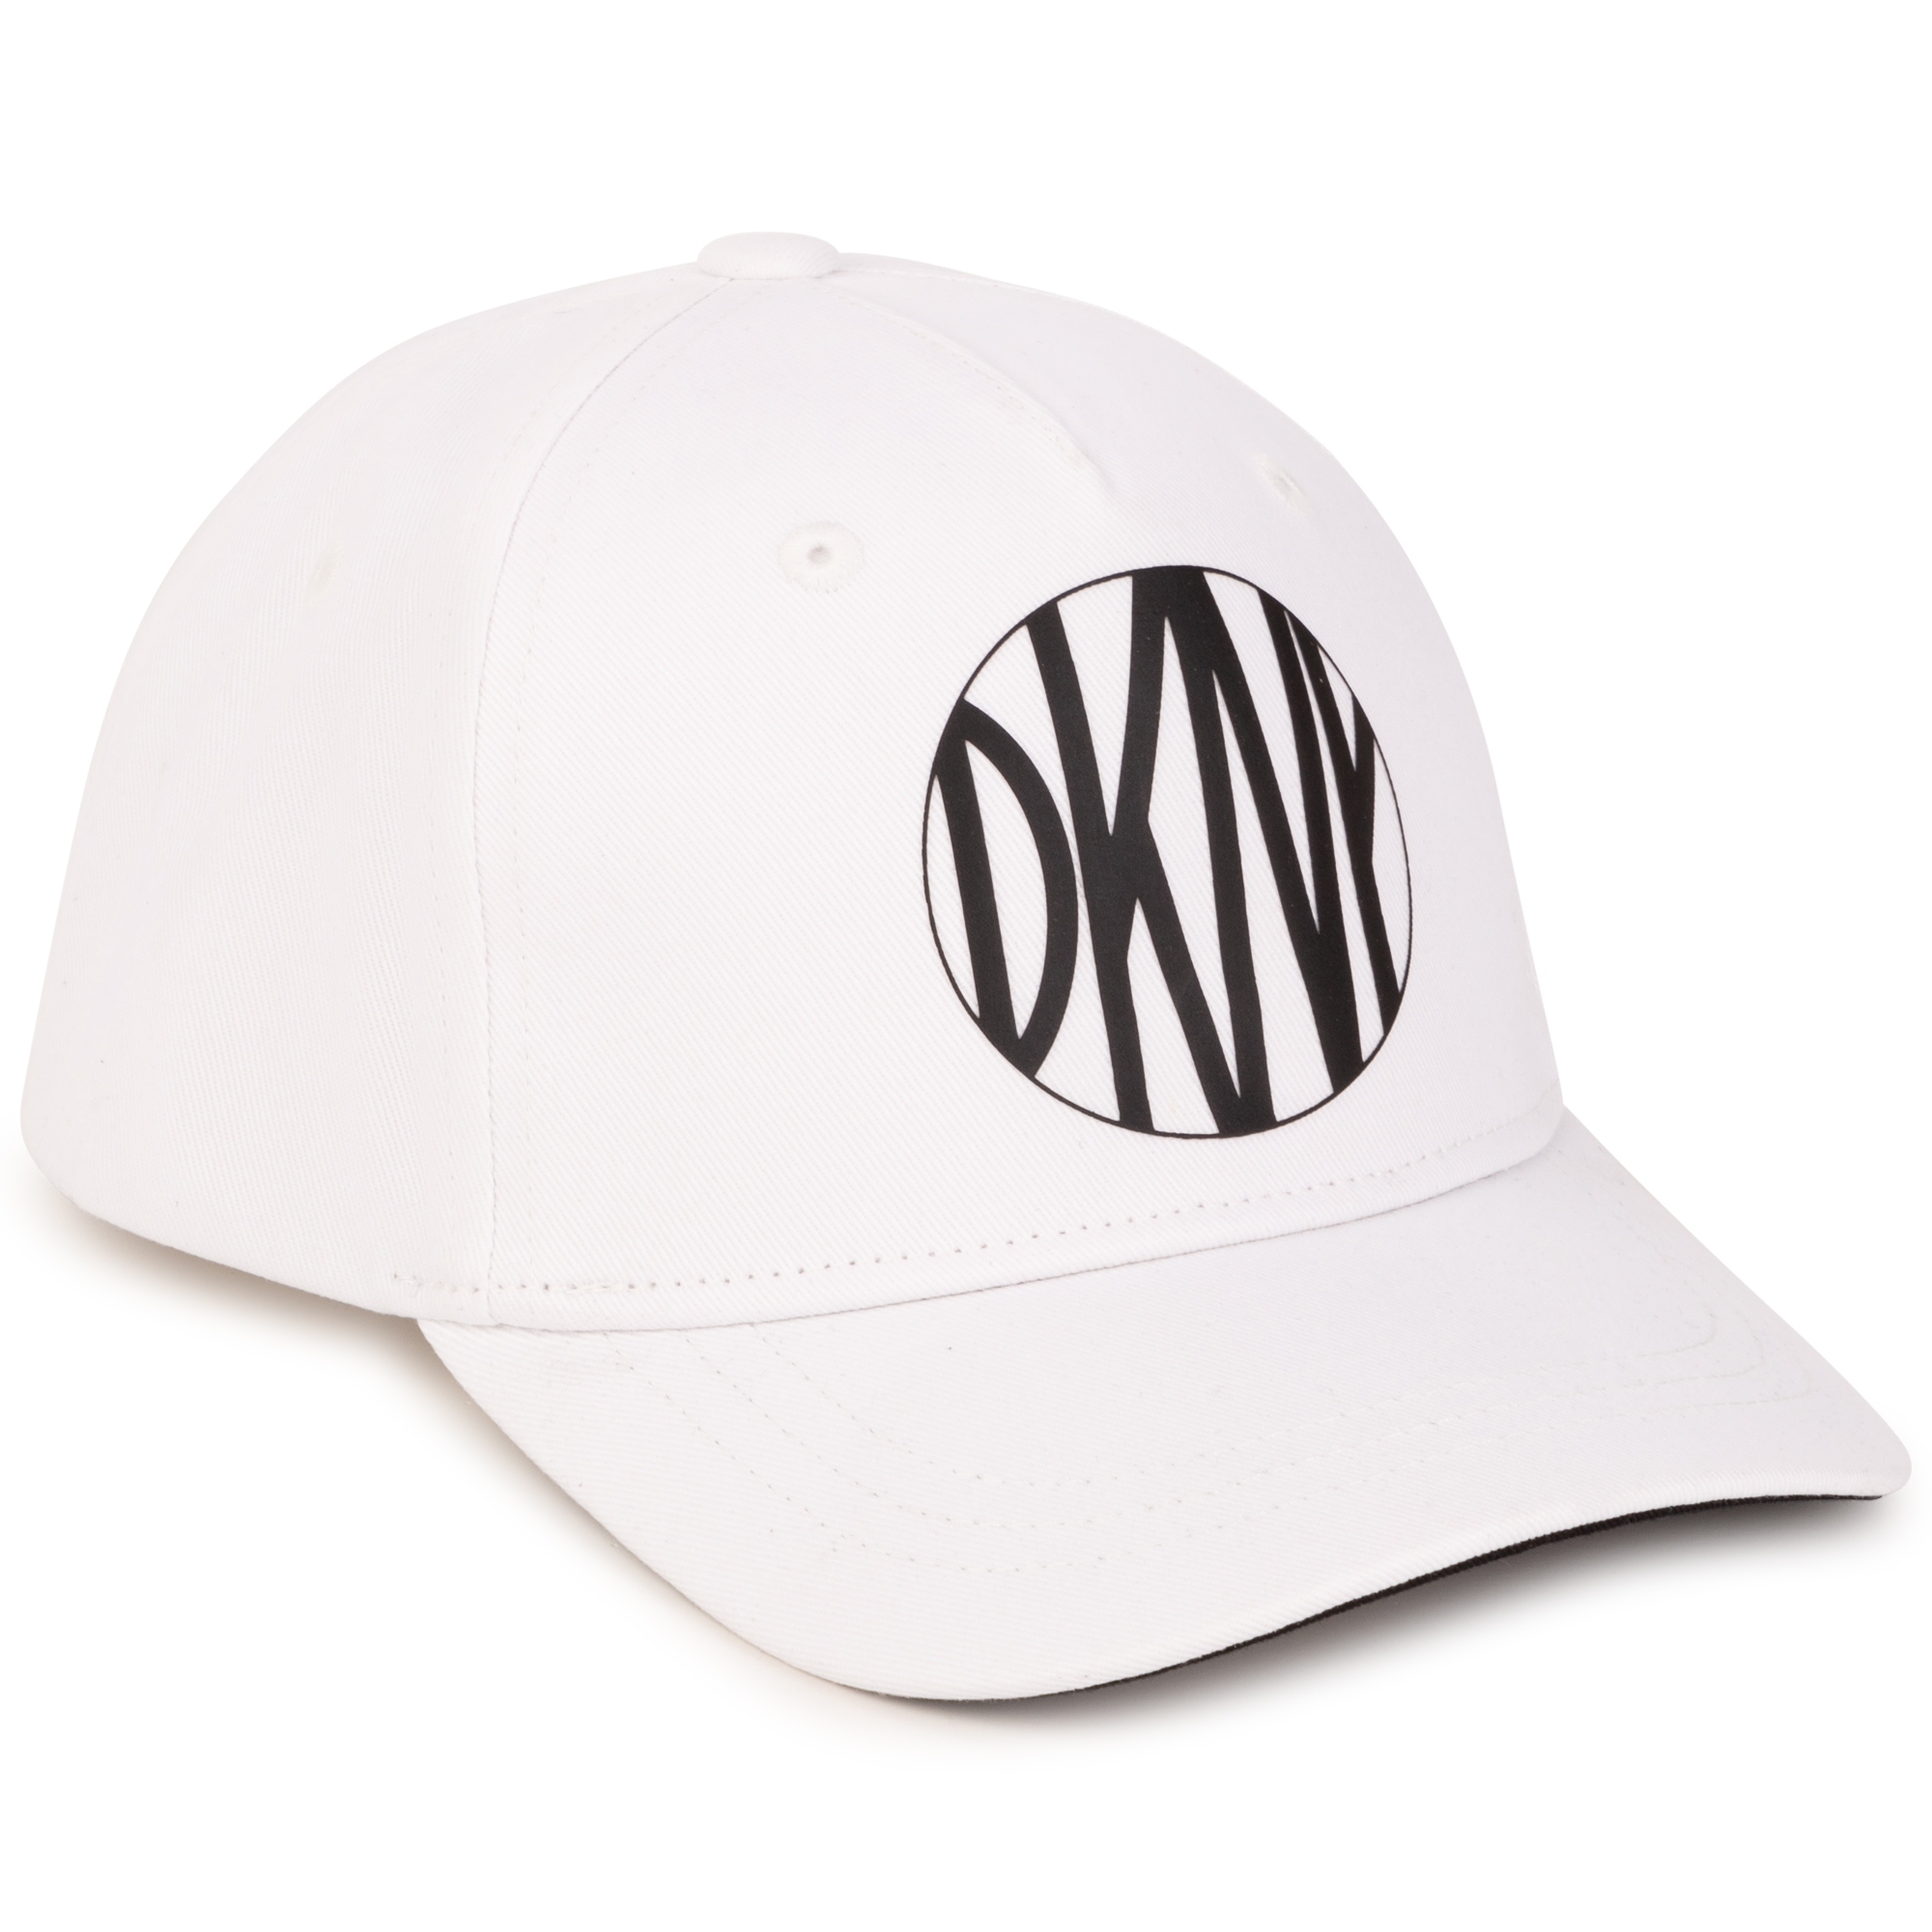 Cotton twill cap DKNY for GIRL